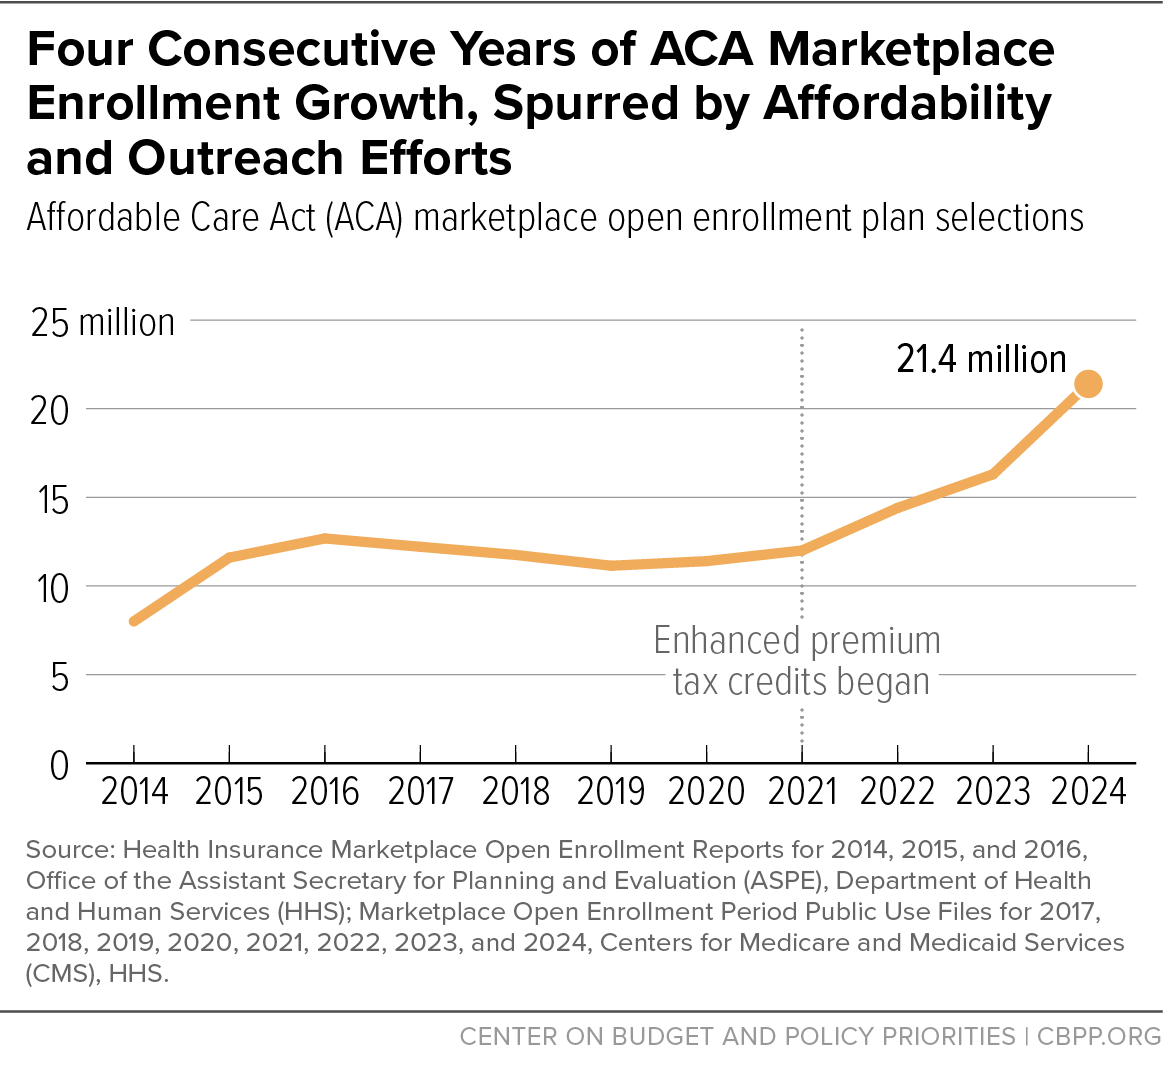 Four Consecutive Years of ACA Marketplace Enrollment Growth, Spurred by Affordability and Outreach Efforts